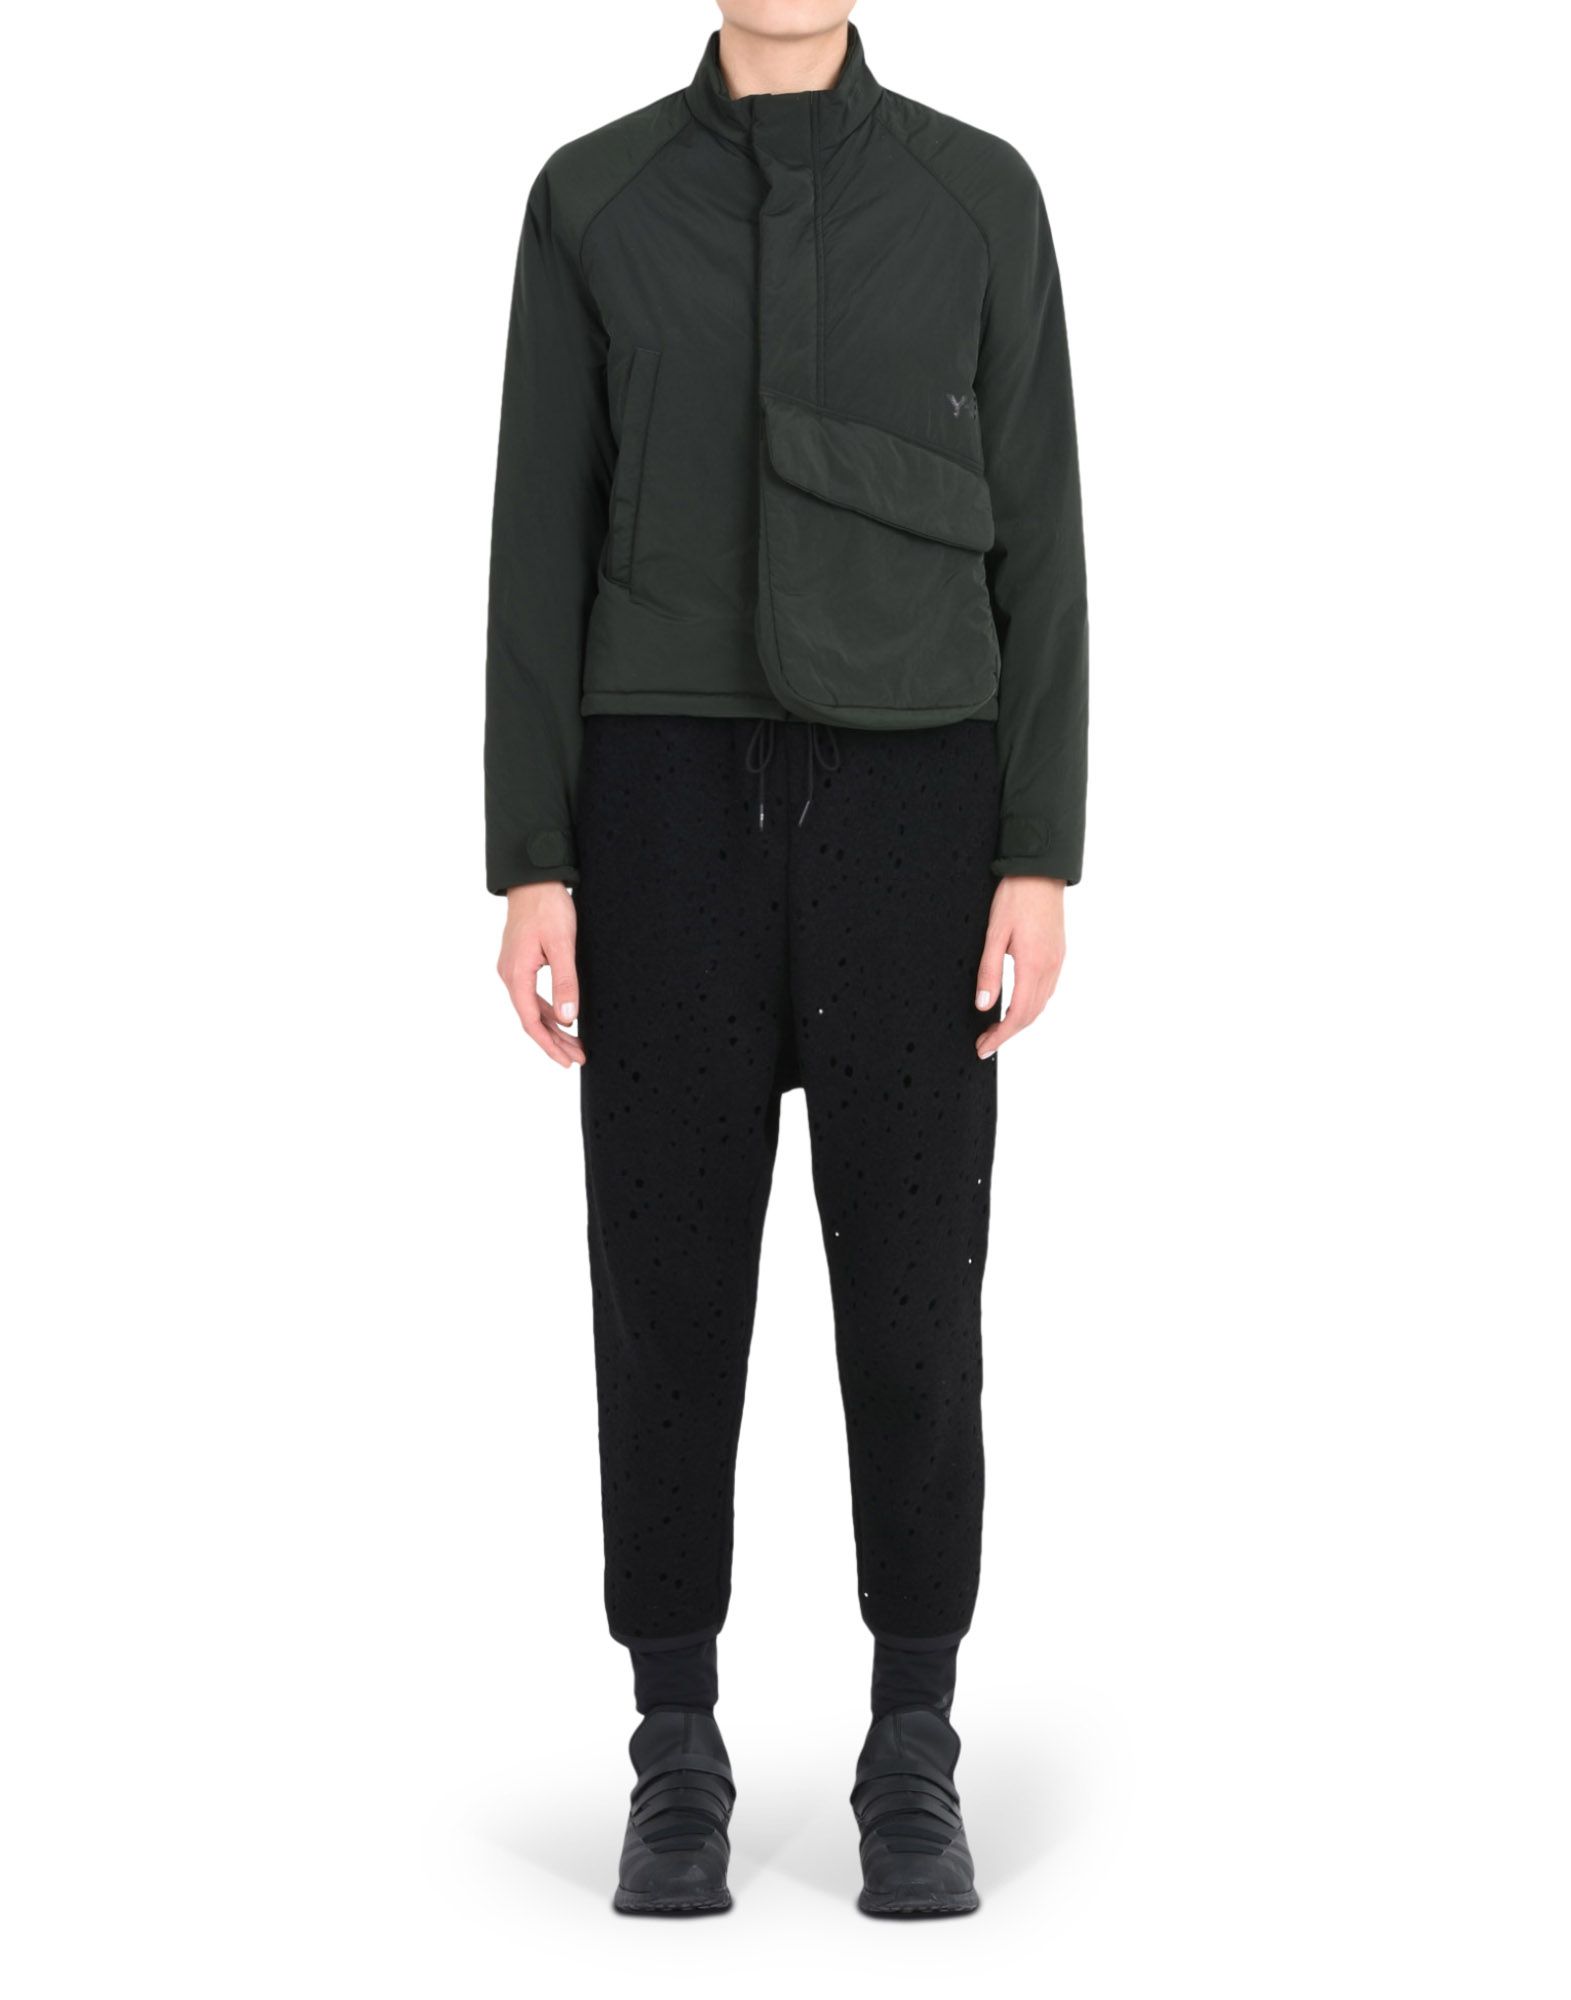 Y 3 WOOL JERSEY PANT for Women | Adidas Y-3 Official Store